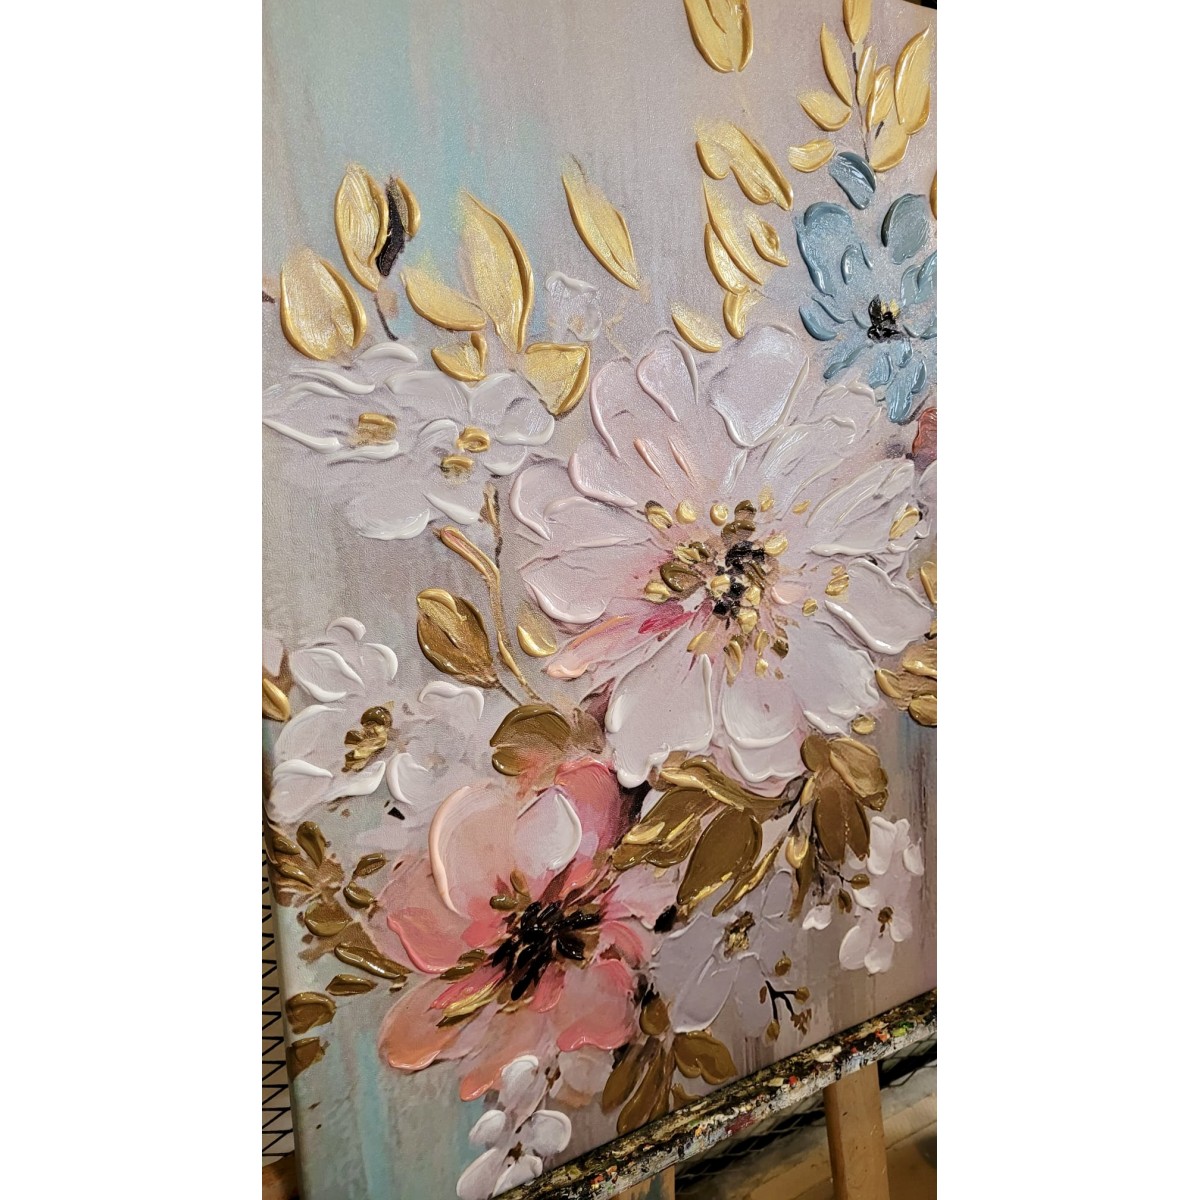 Flower with Gold Leaves 3d Heavy Textured Partial Oil Painting